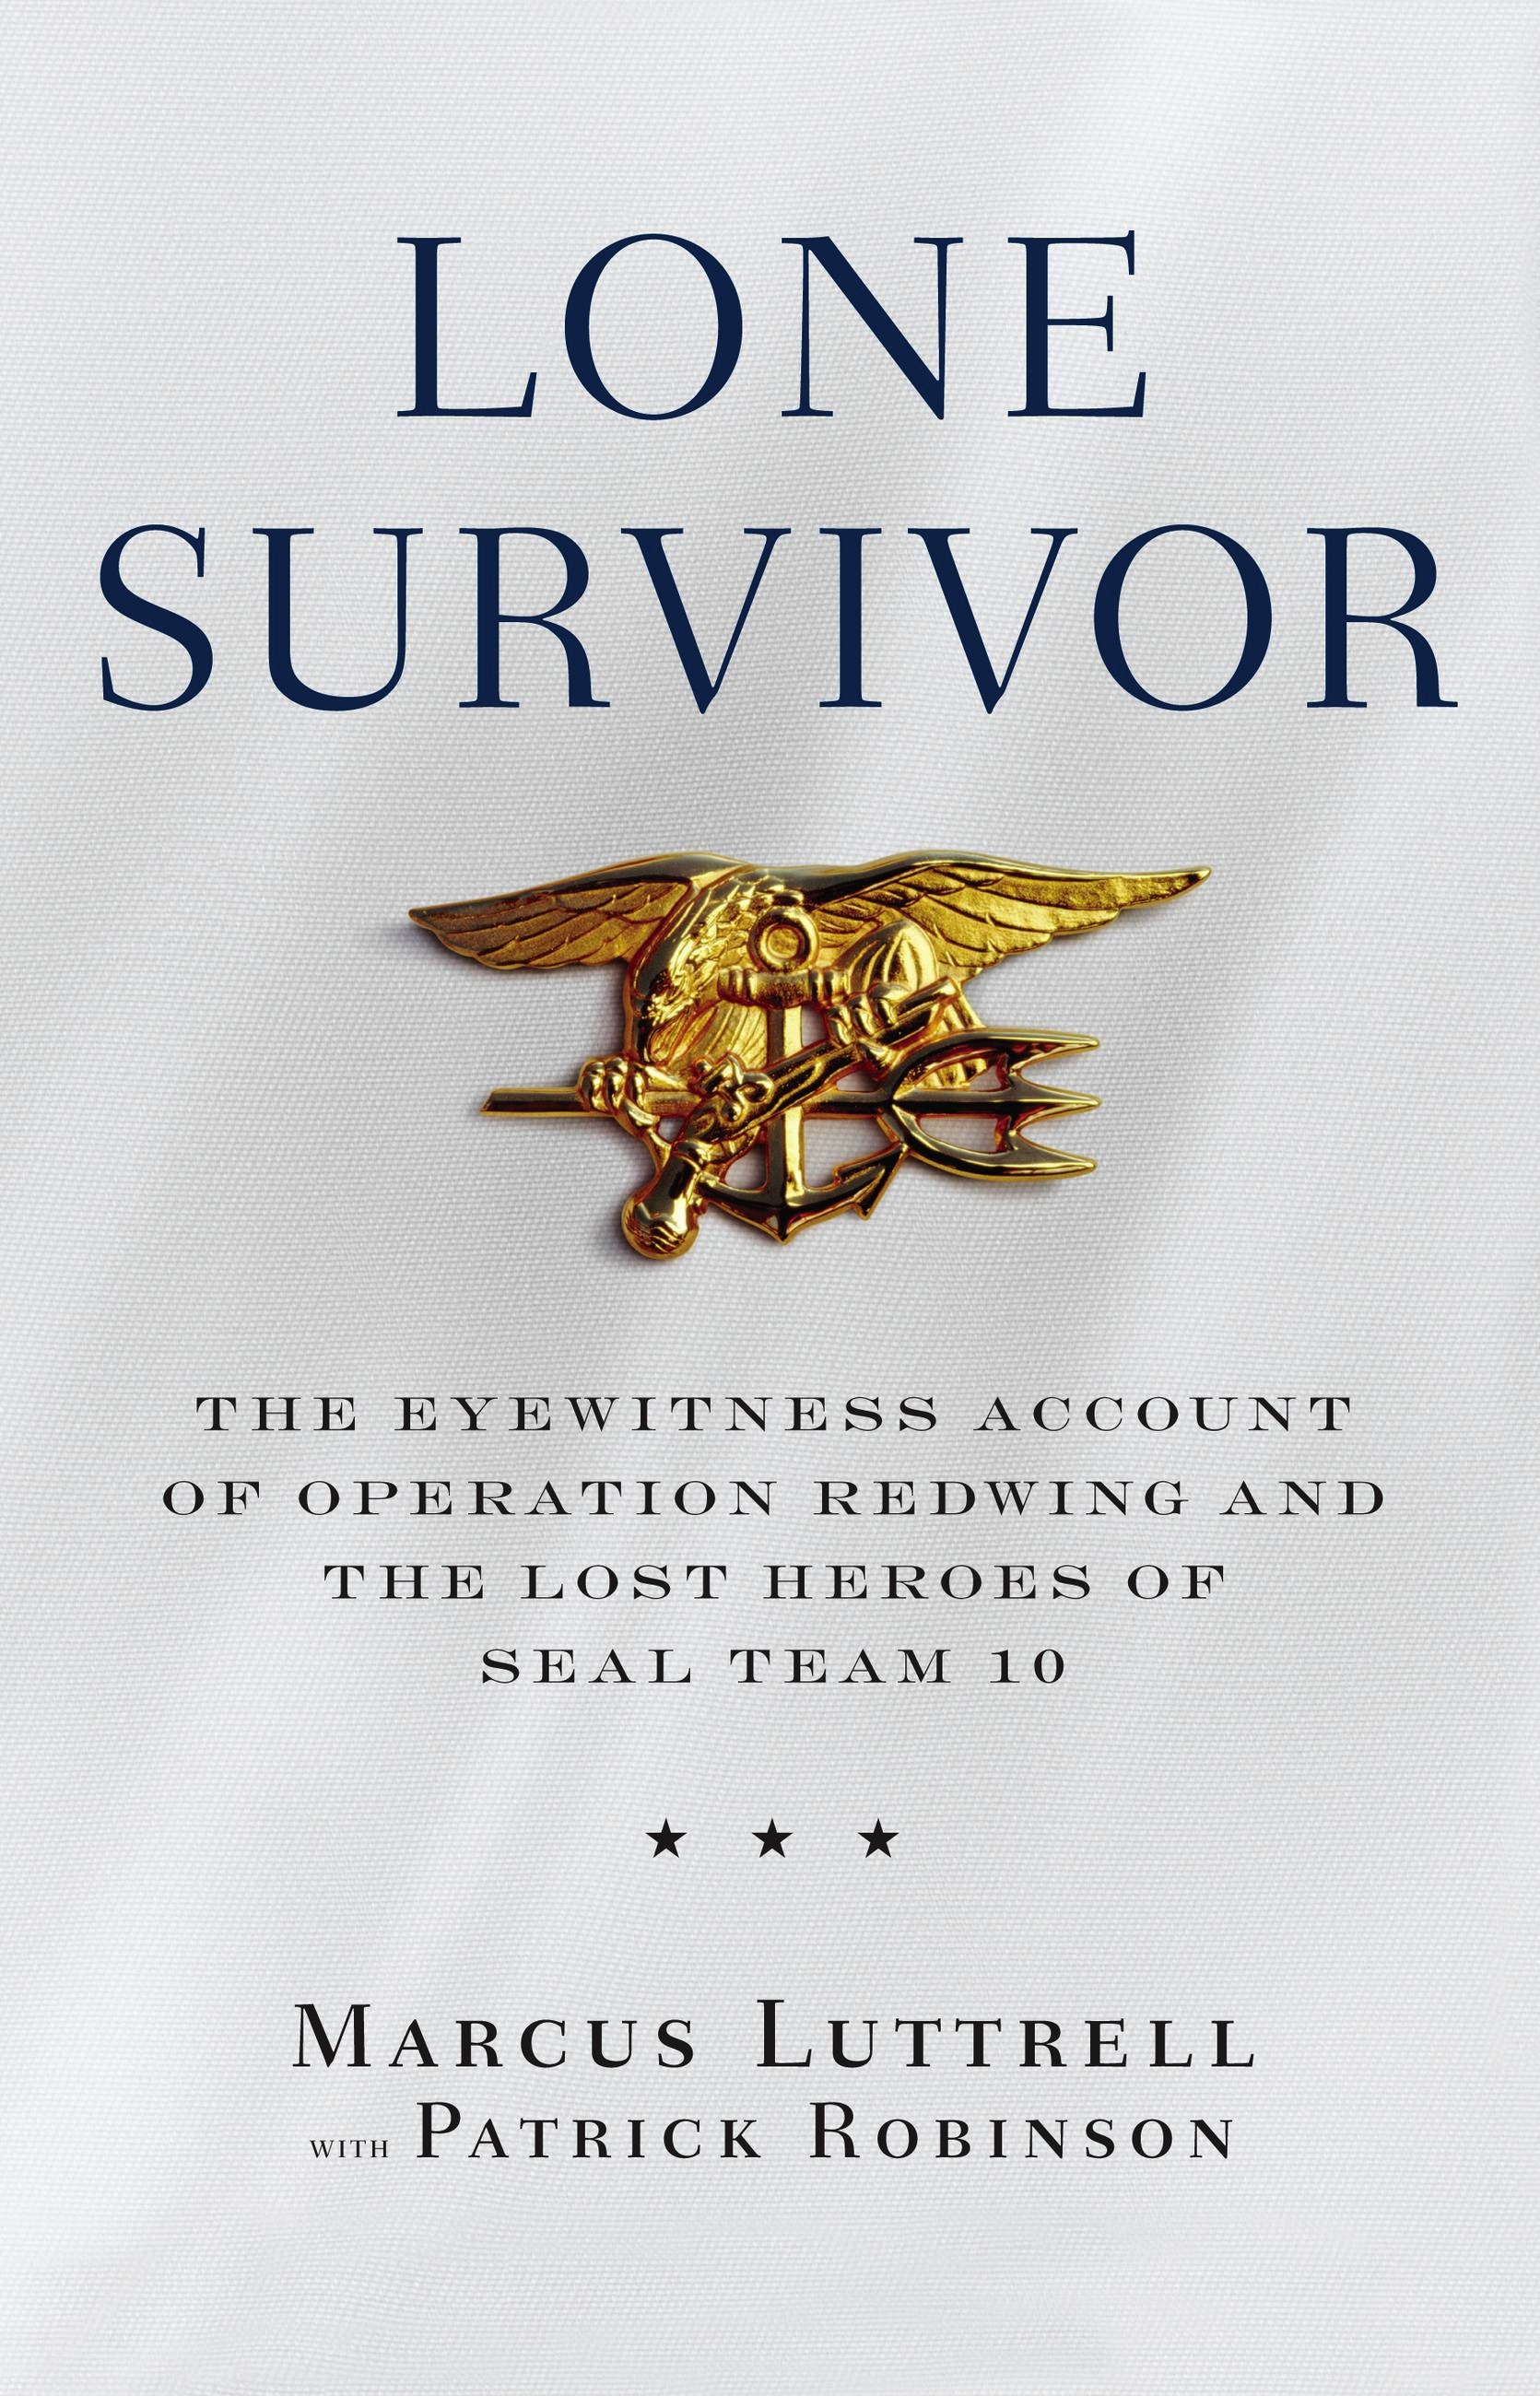 Harrowing real-life mission inspires intense but incomplete 'Lone Survivor